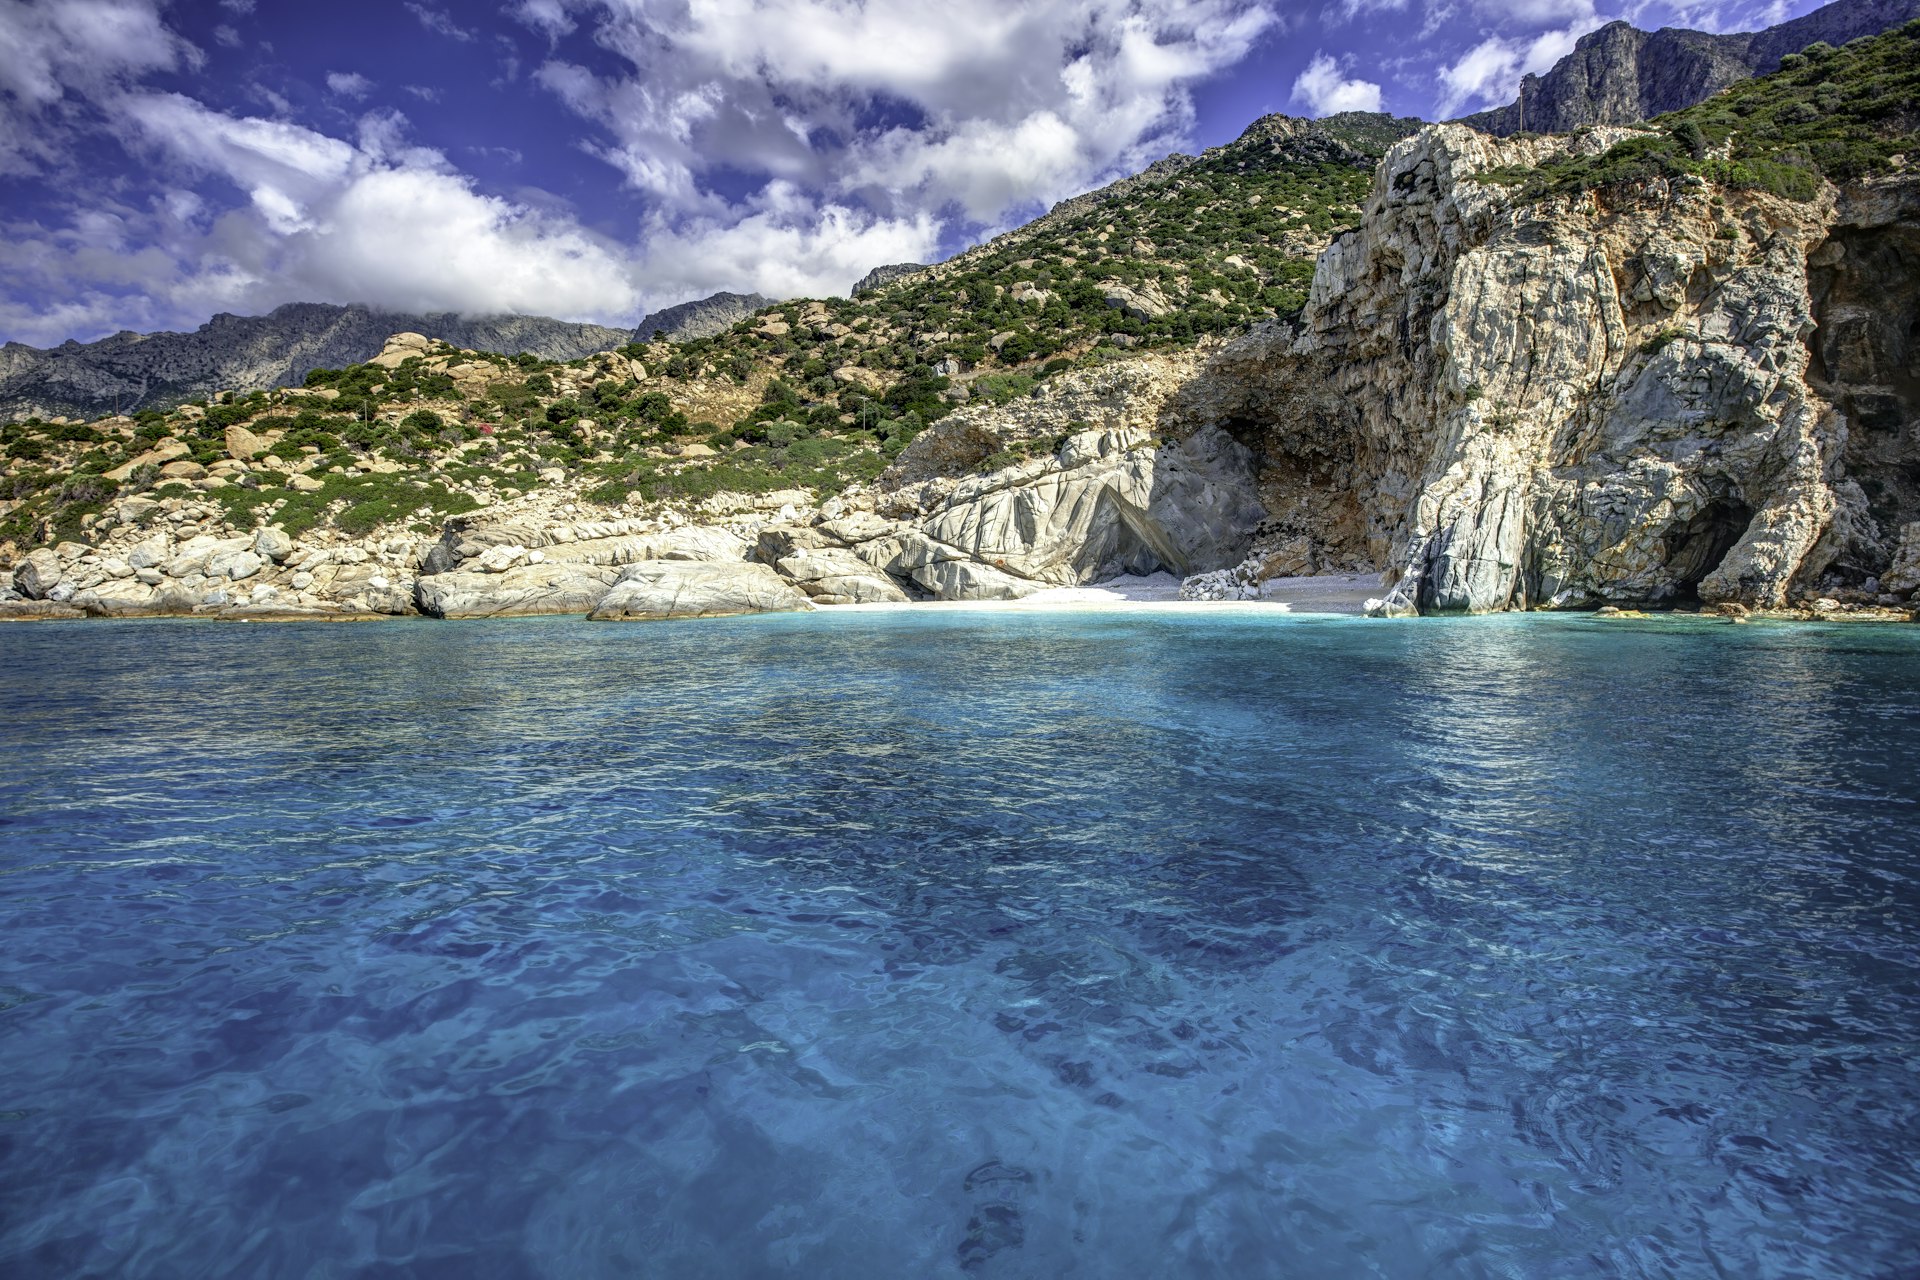 The beach of Seychelles, with transparent turquoise waters, in Ikaria island, Greece